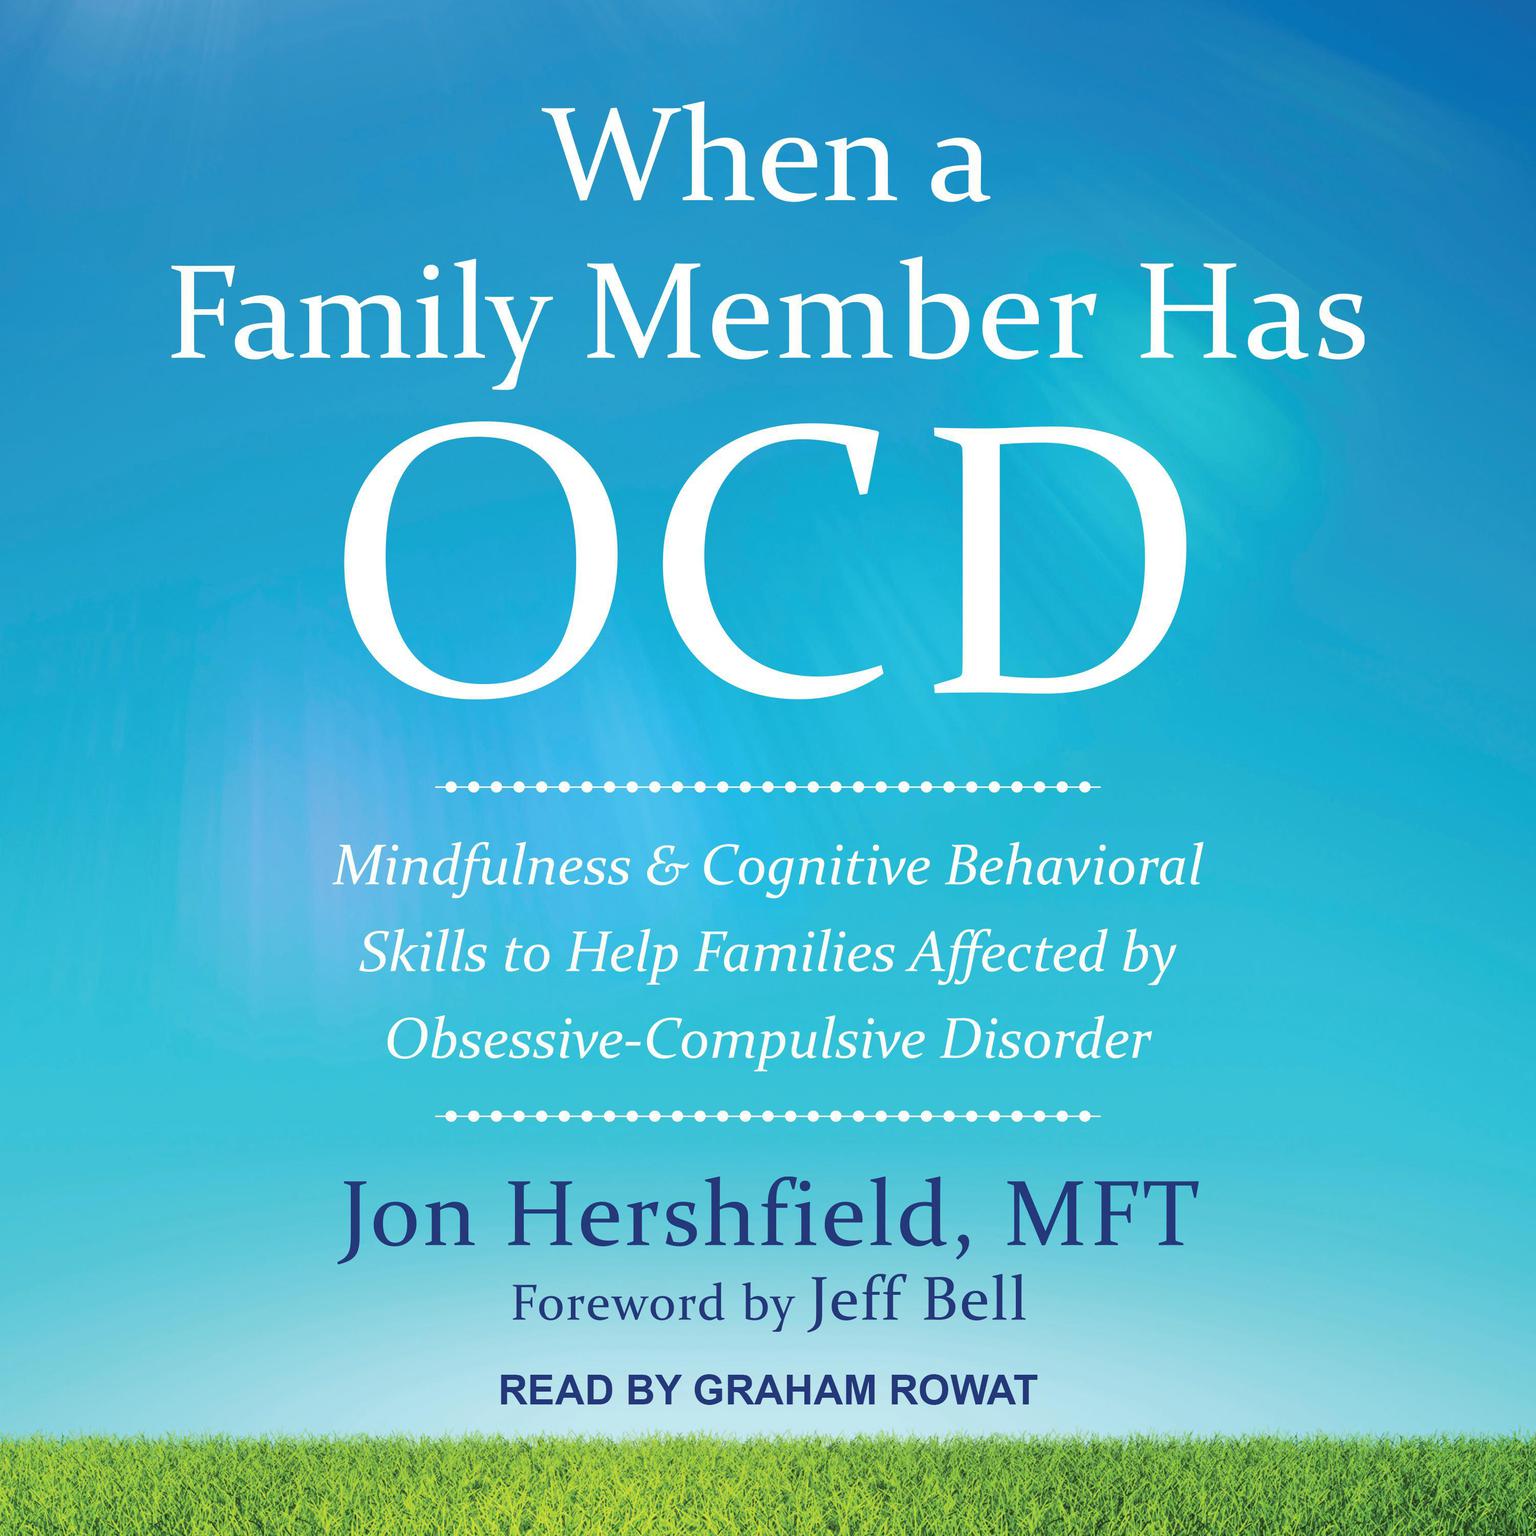 When a Family Member Has OCD: Mindfulness and Cognitive Behavioral Skills to Help Families Affected by Obsessive-Compulsive Disorder Audiobook, by Jon Hershfield